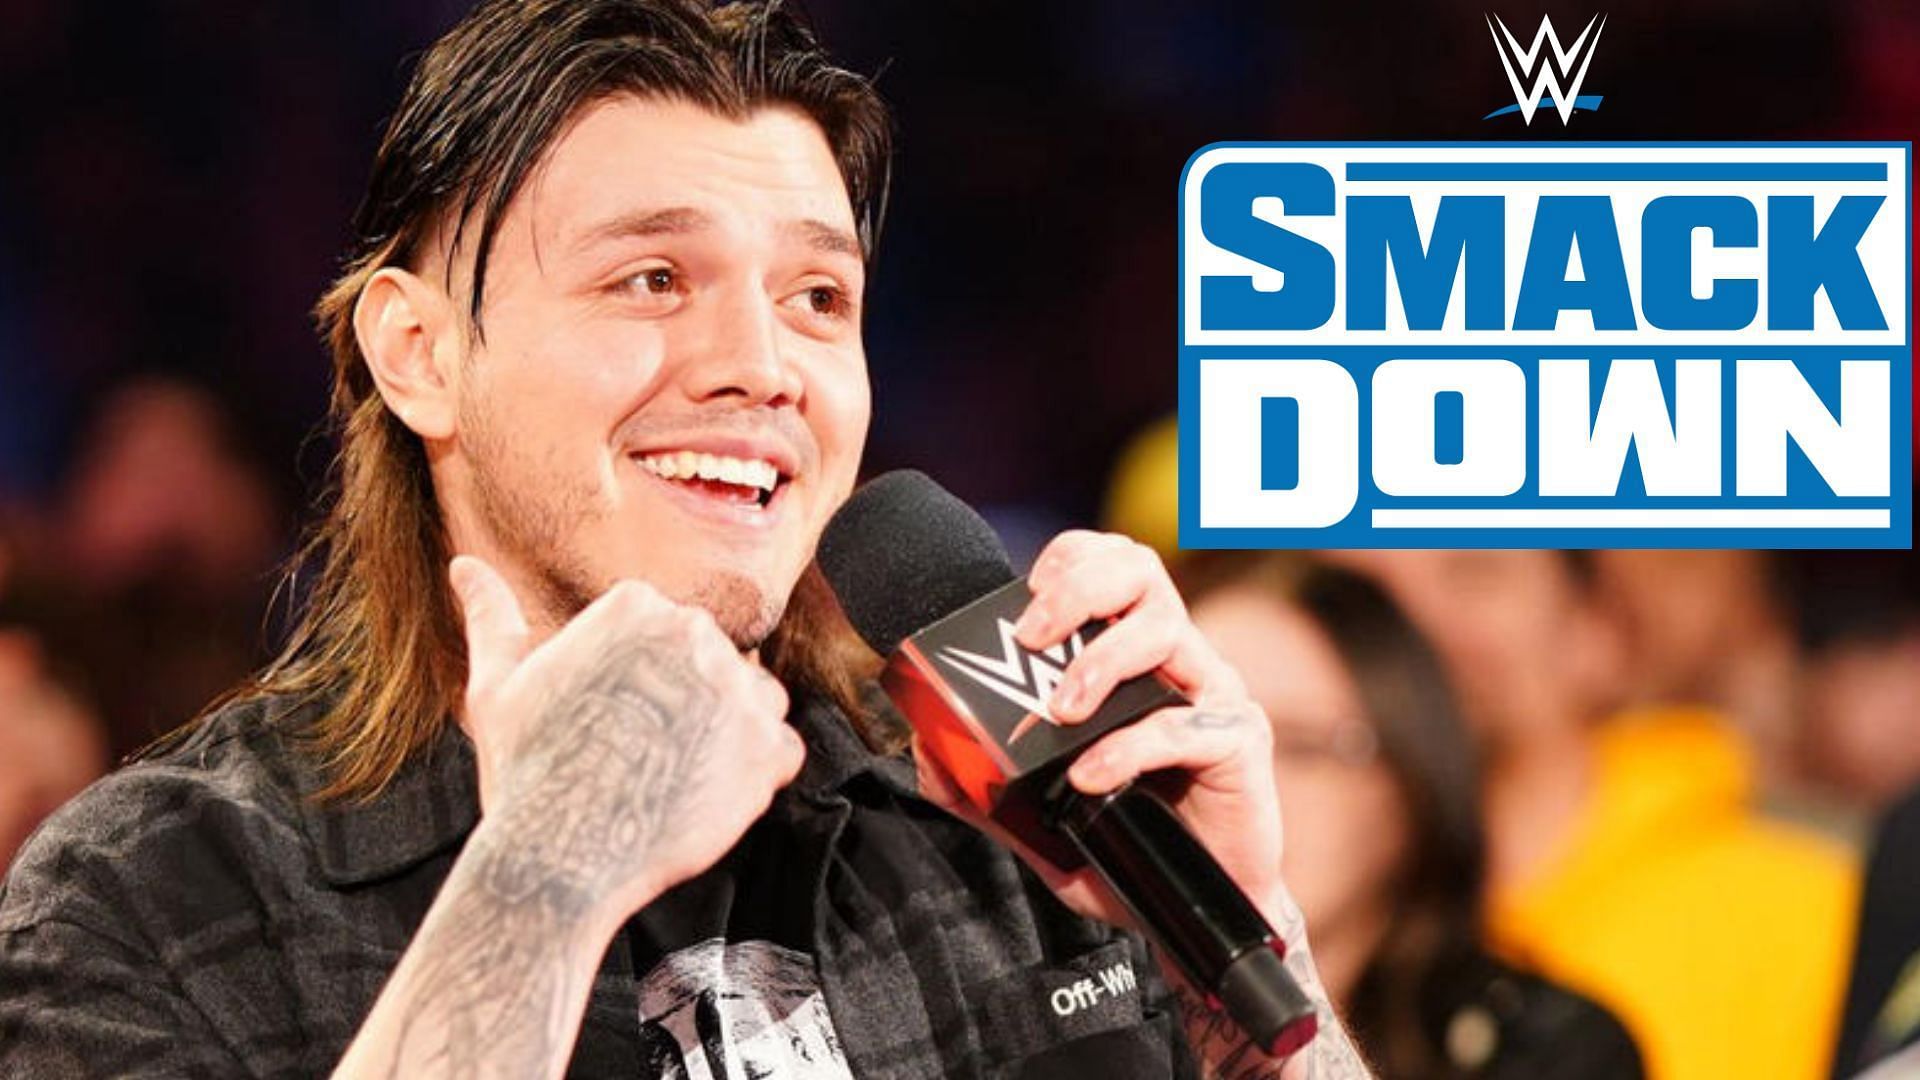 There is a SmackDown star looking to make Dom pay for his actions...